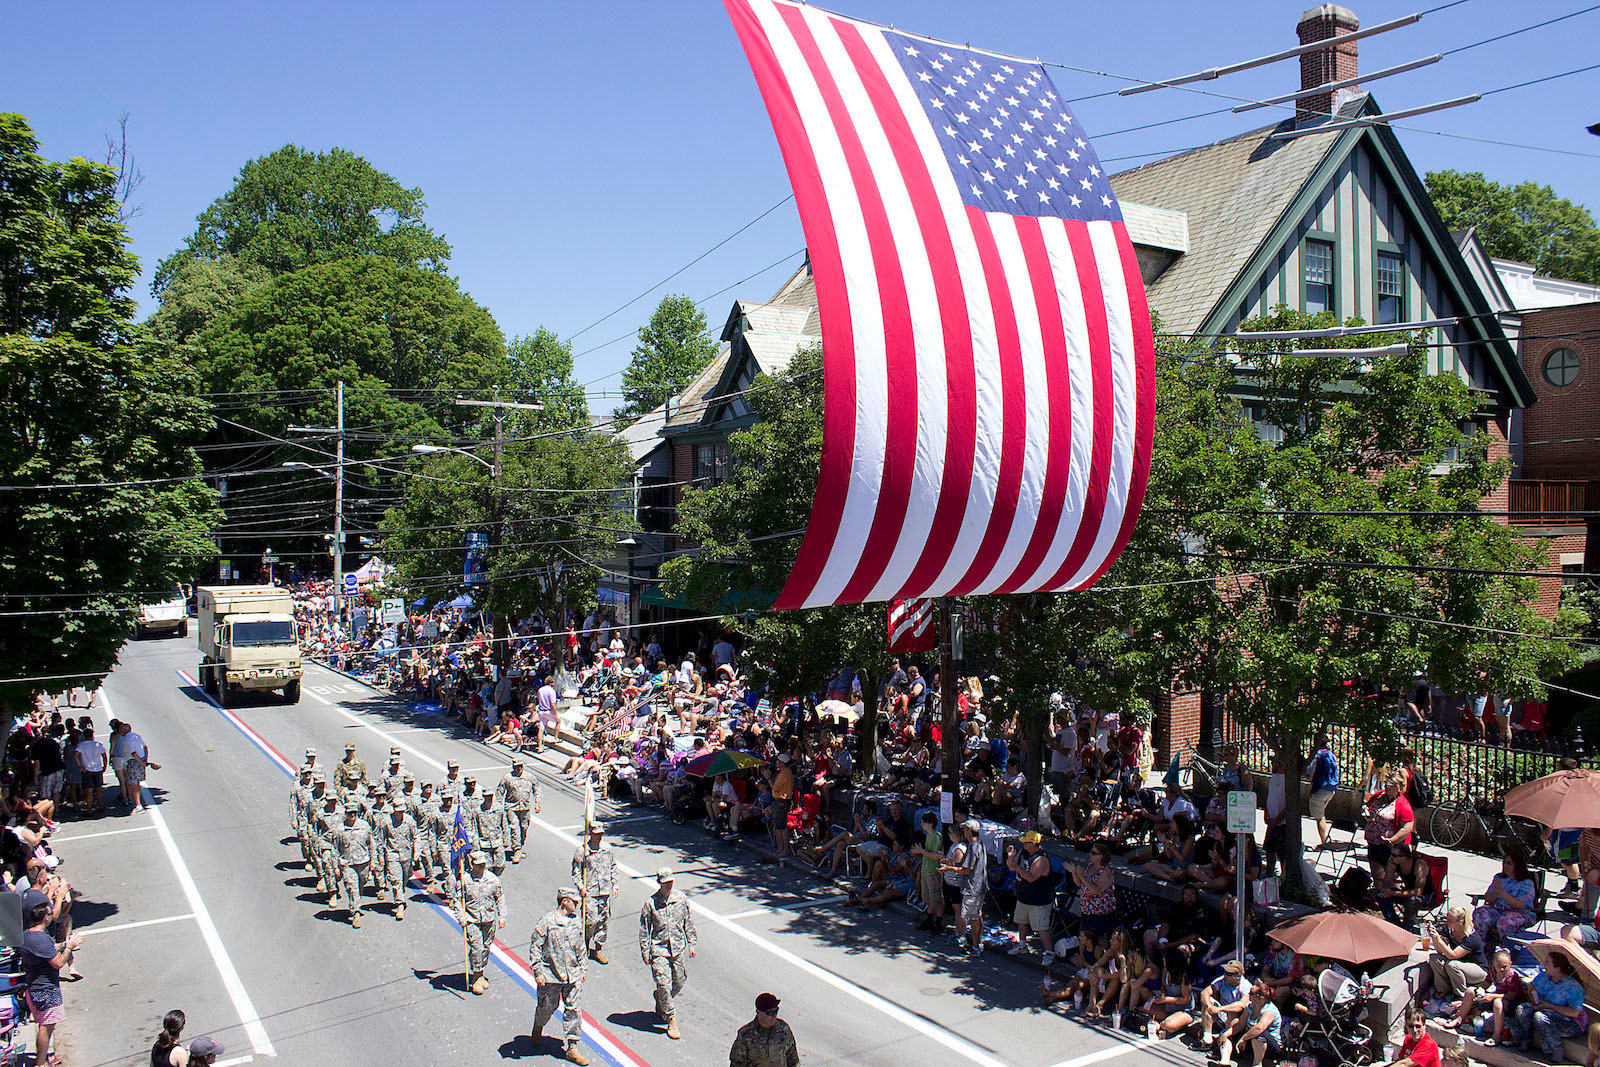 The Fourth of July Parade winds down Hope Street last year. The celebration helps get Bristol national exposure each year.